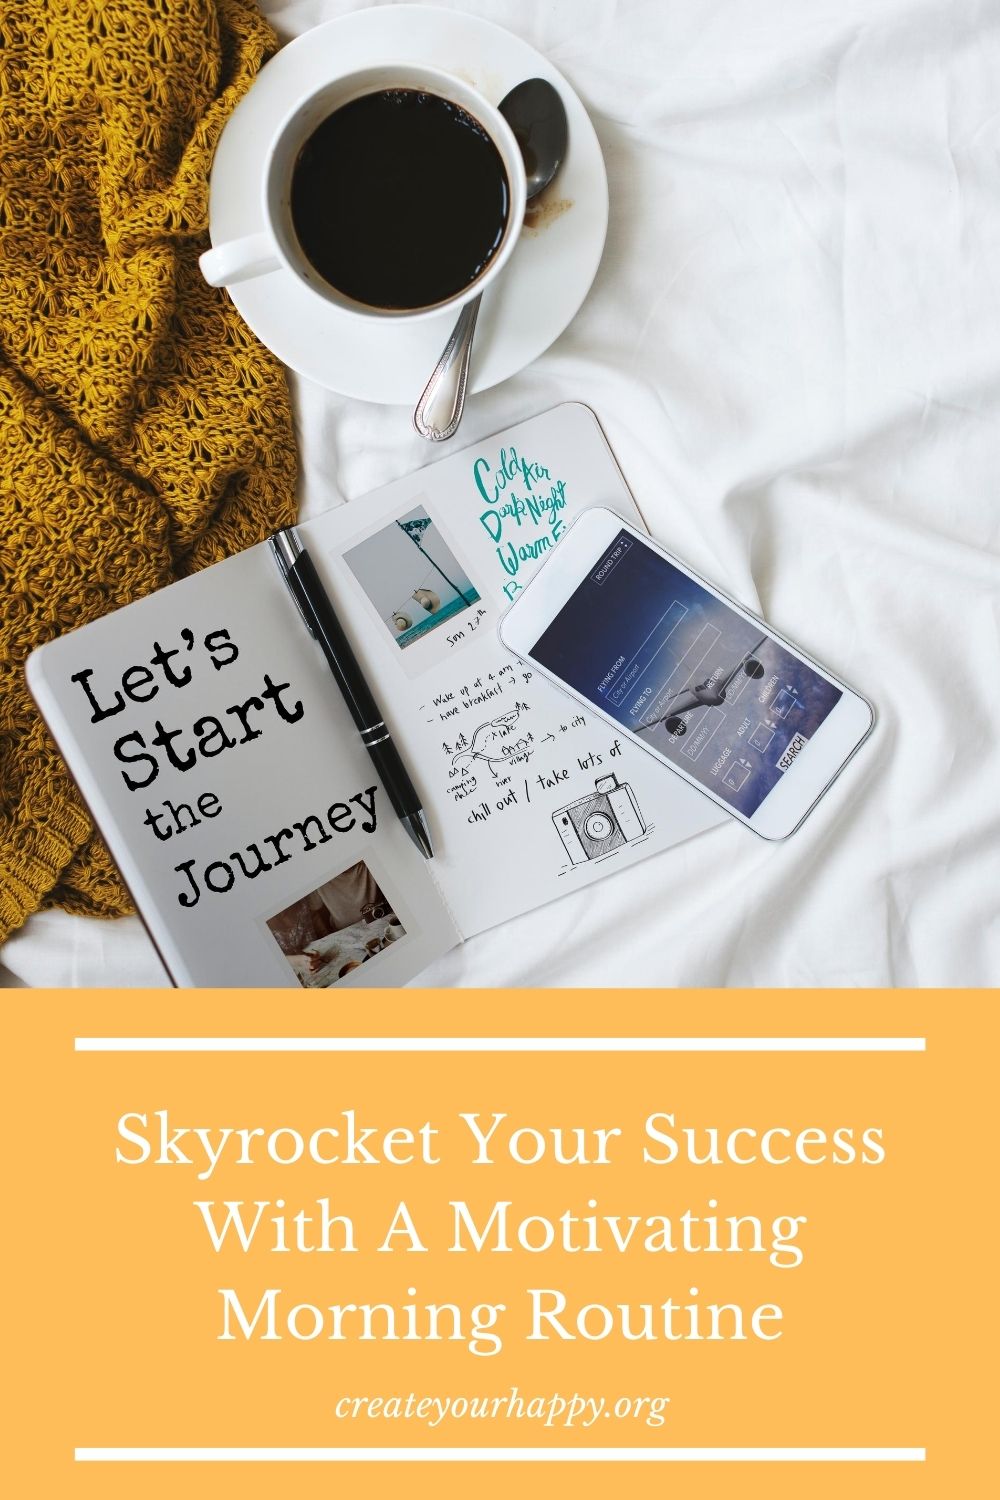 Skyrocket Your Success With a Motivating Morning Routine